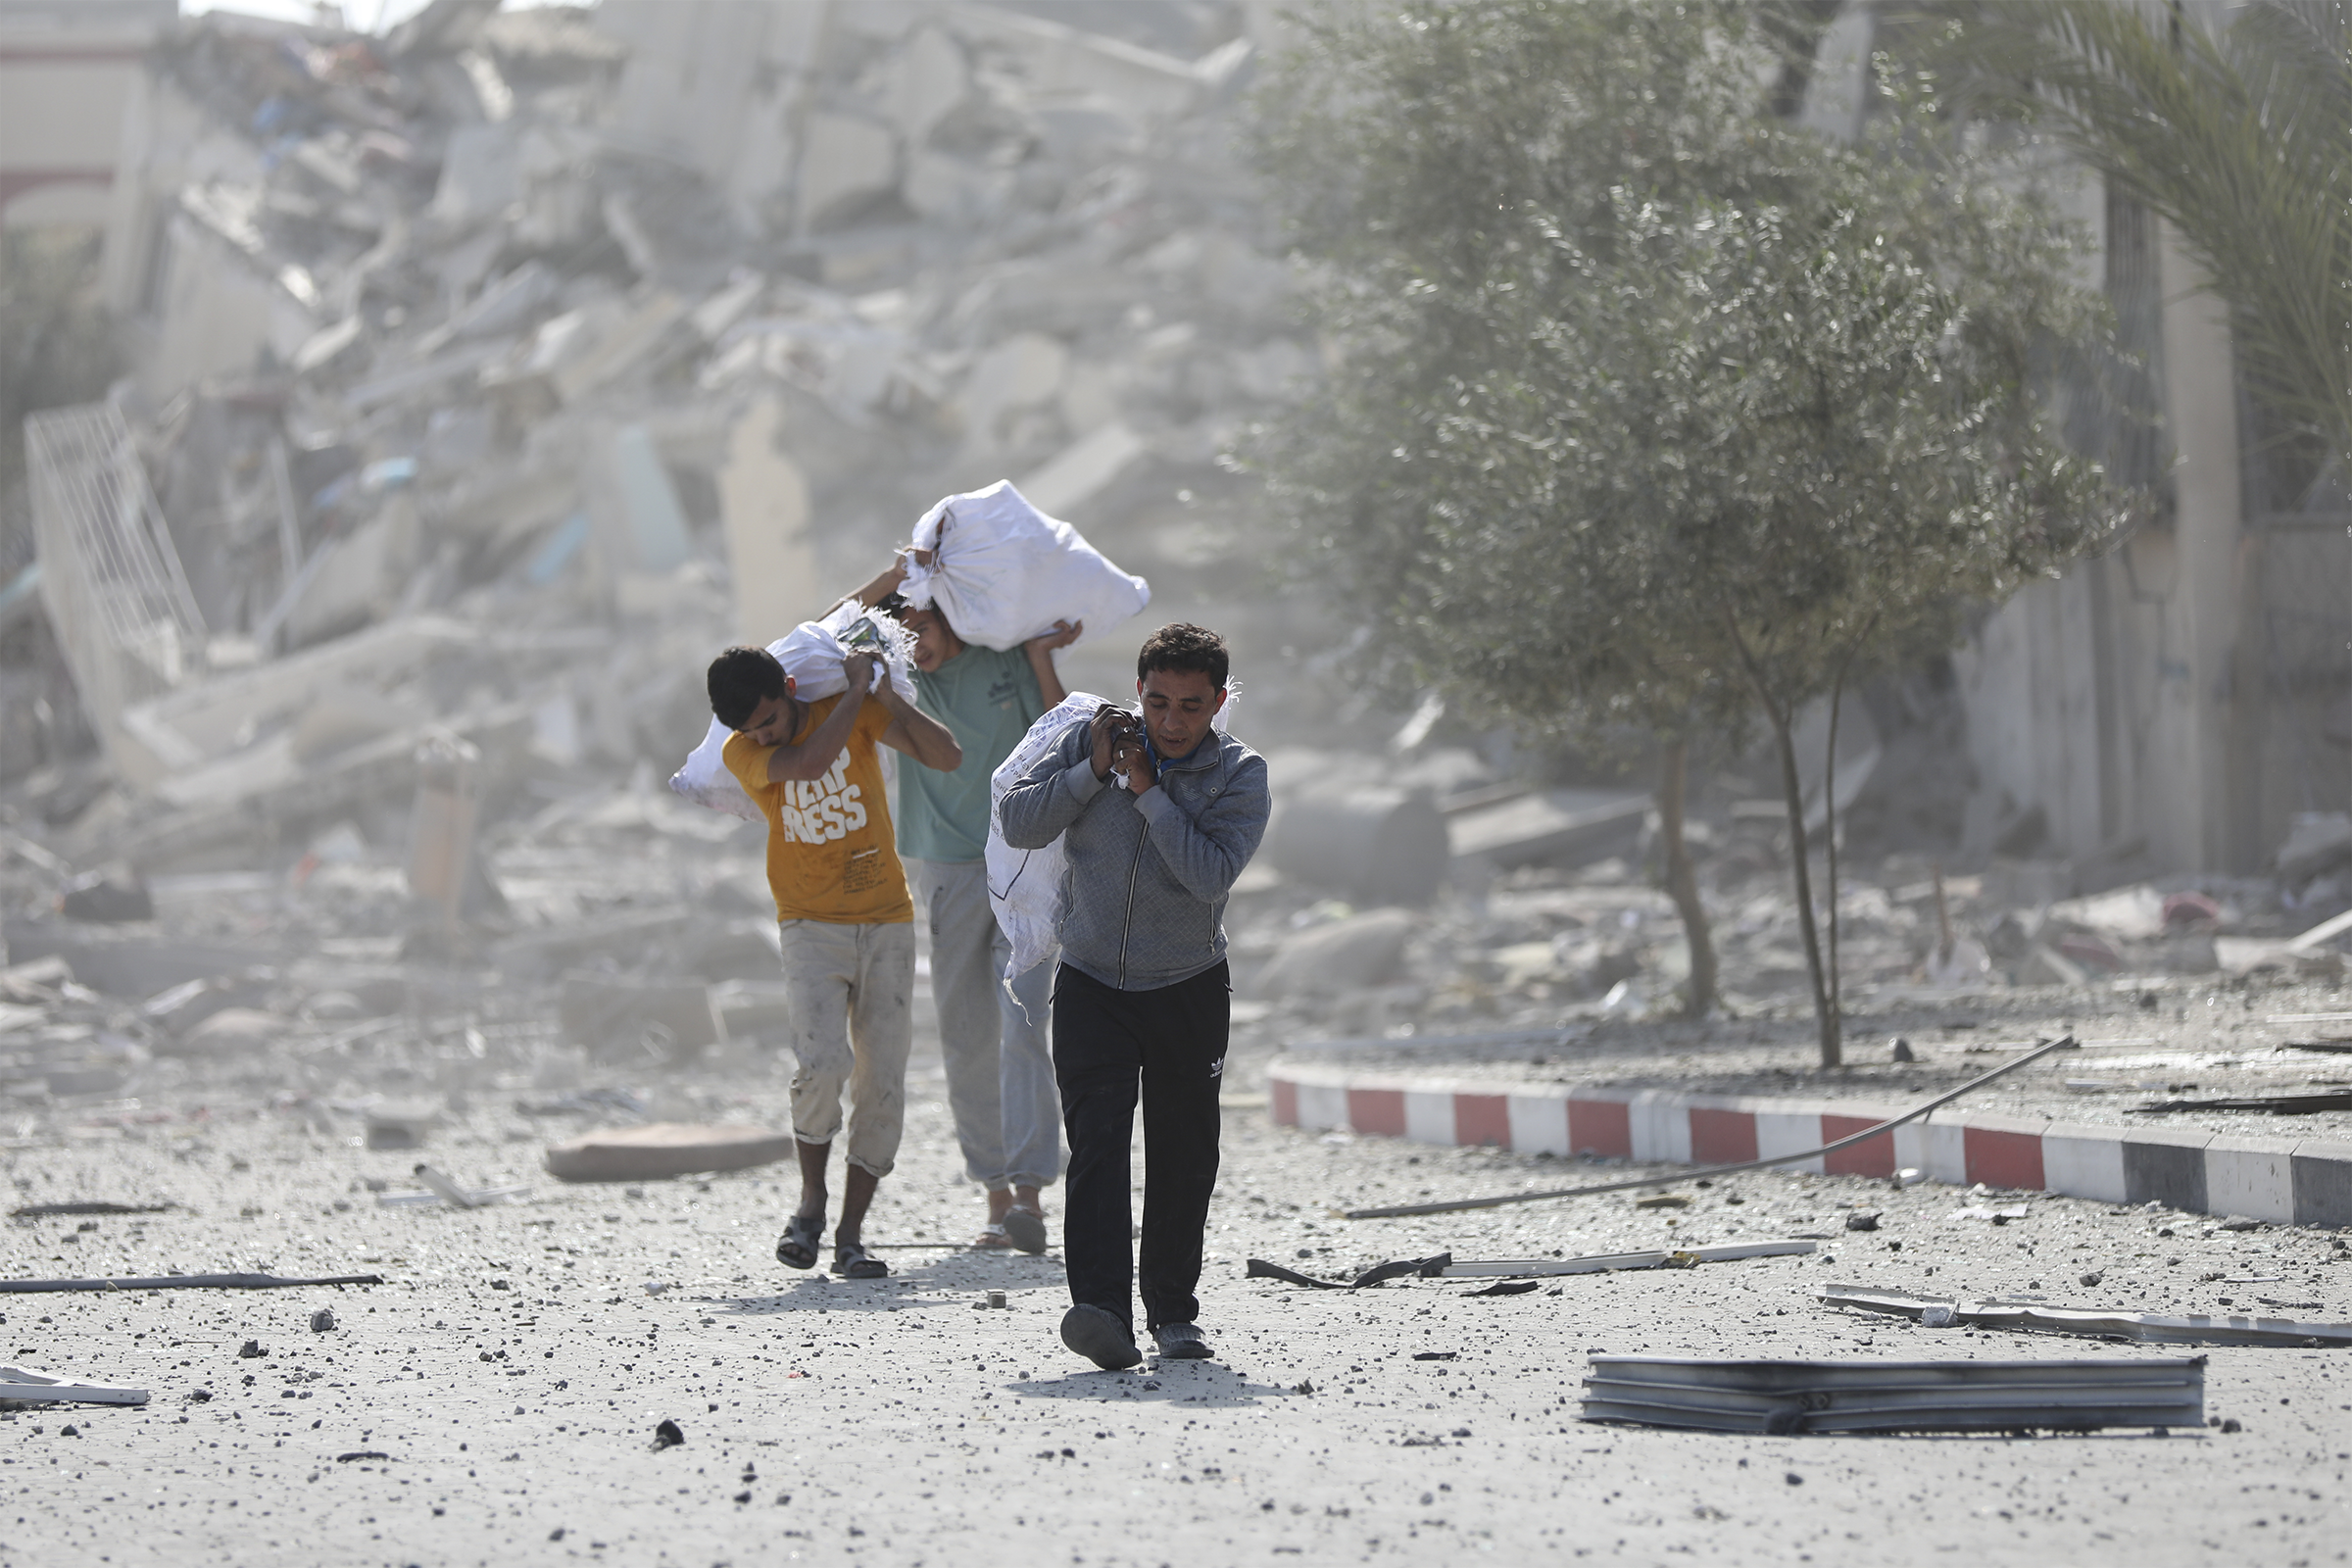 Palestinians walk carrying bags as they pass destroyed buildings